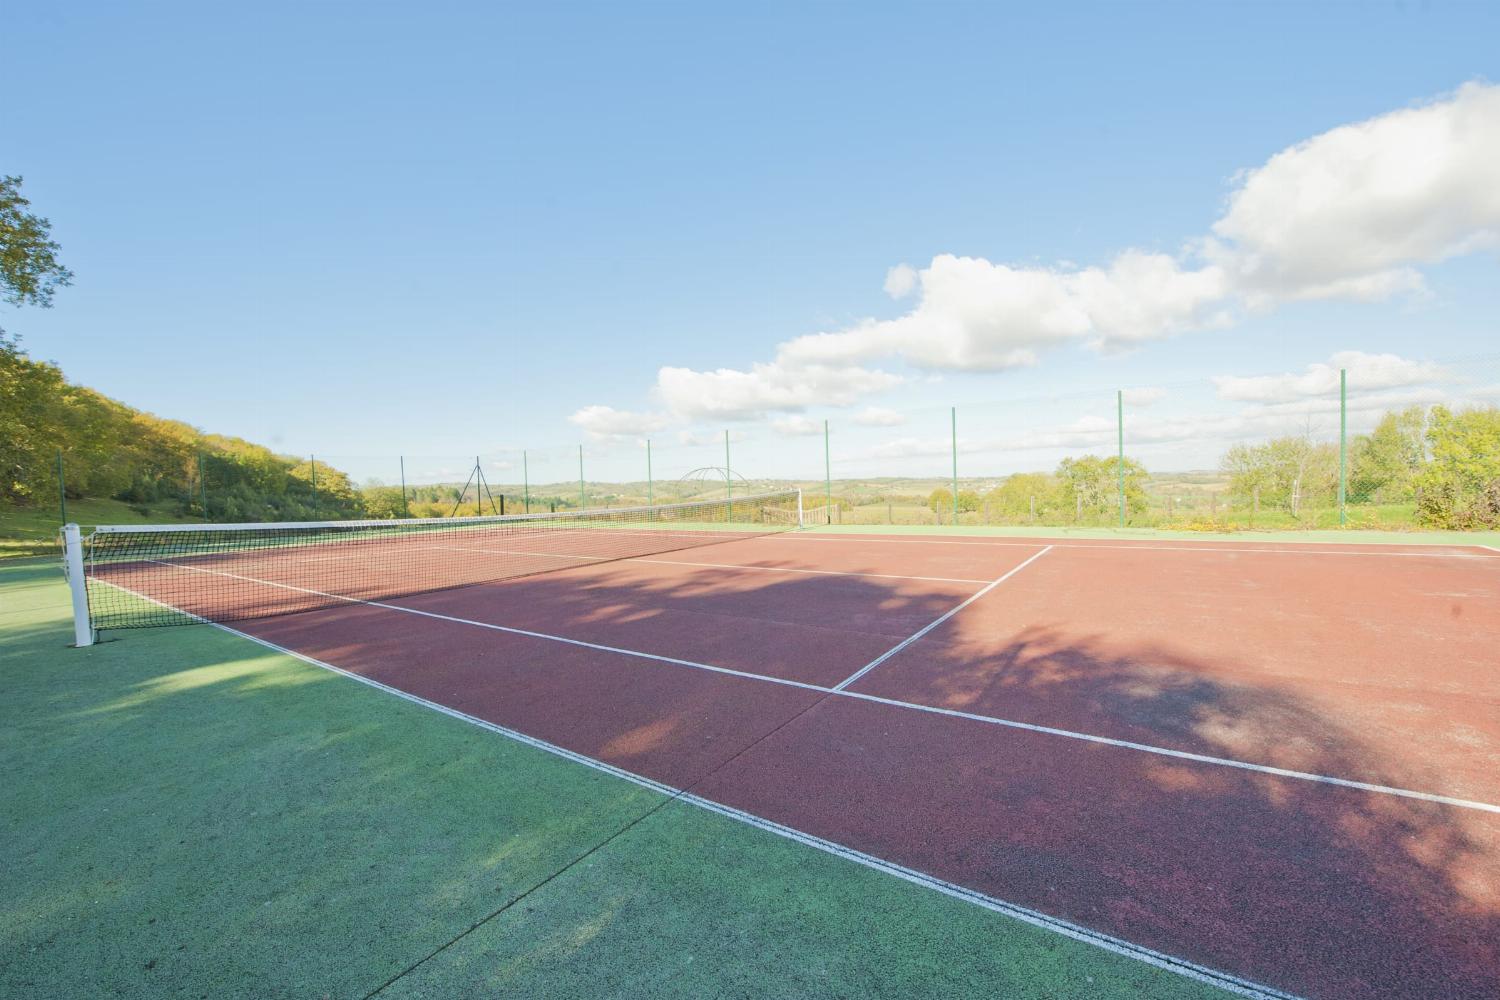 Private tennis court in château grounds